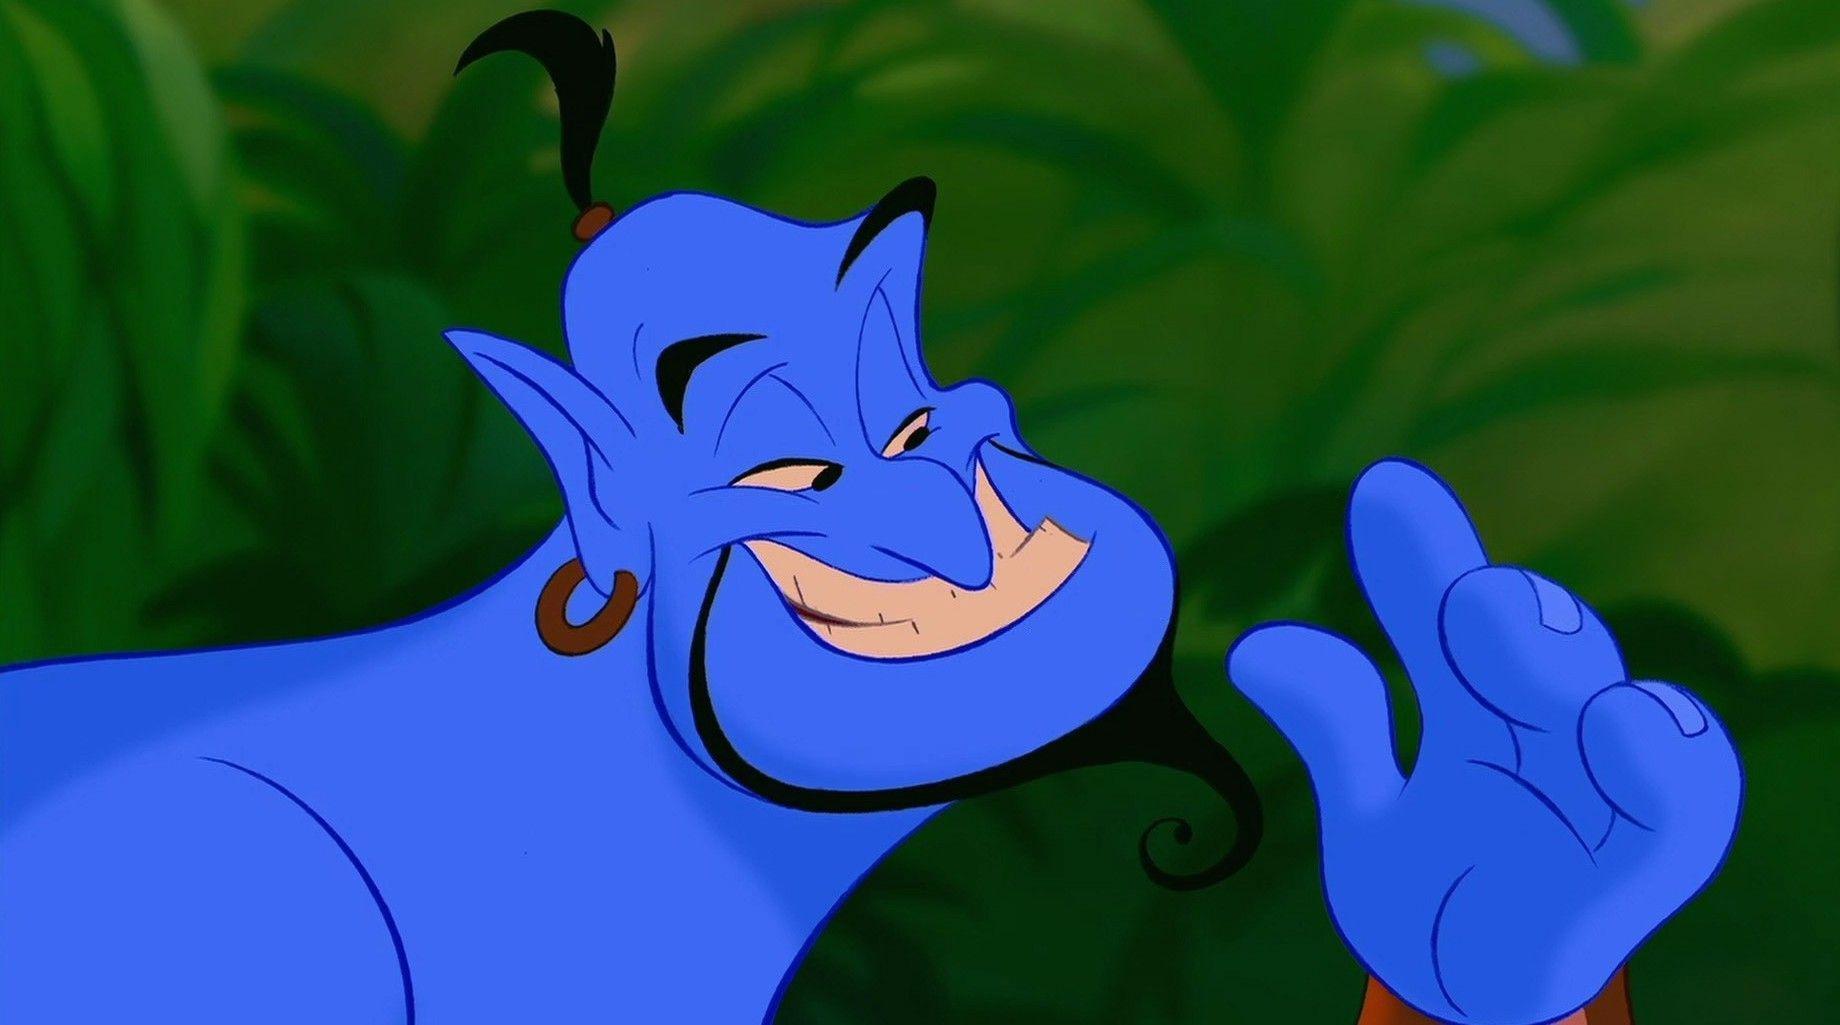 Genie Wallpapers HD Backgrounds, Image, Pics, Photos Free.